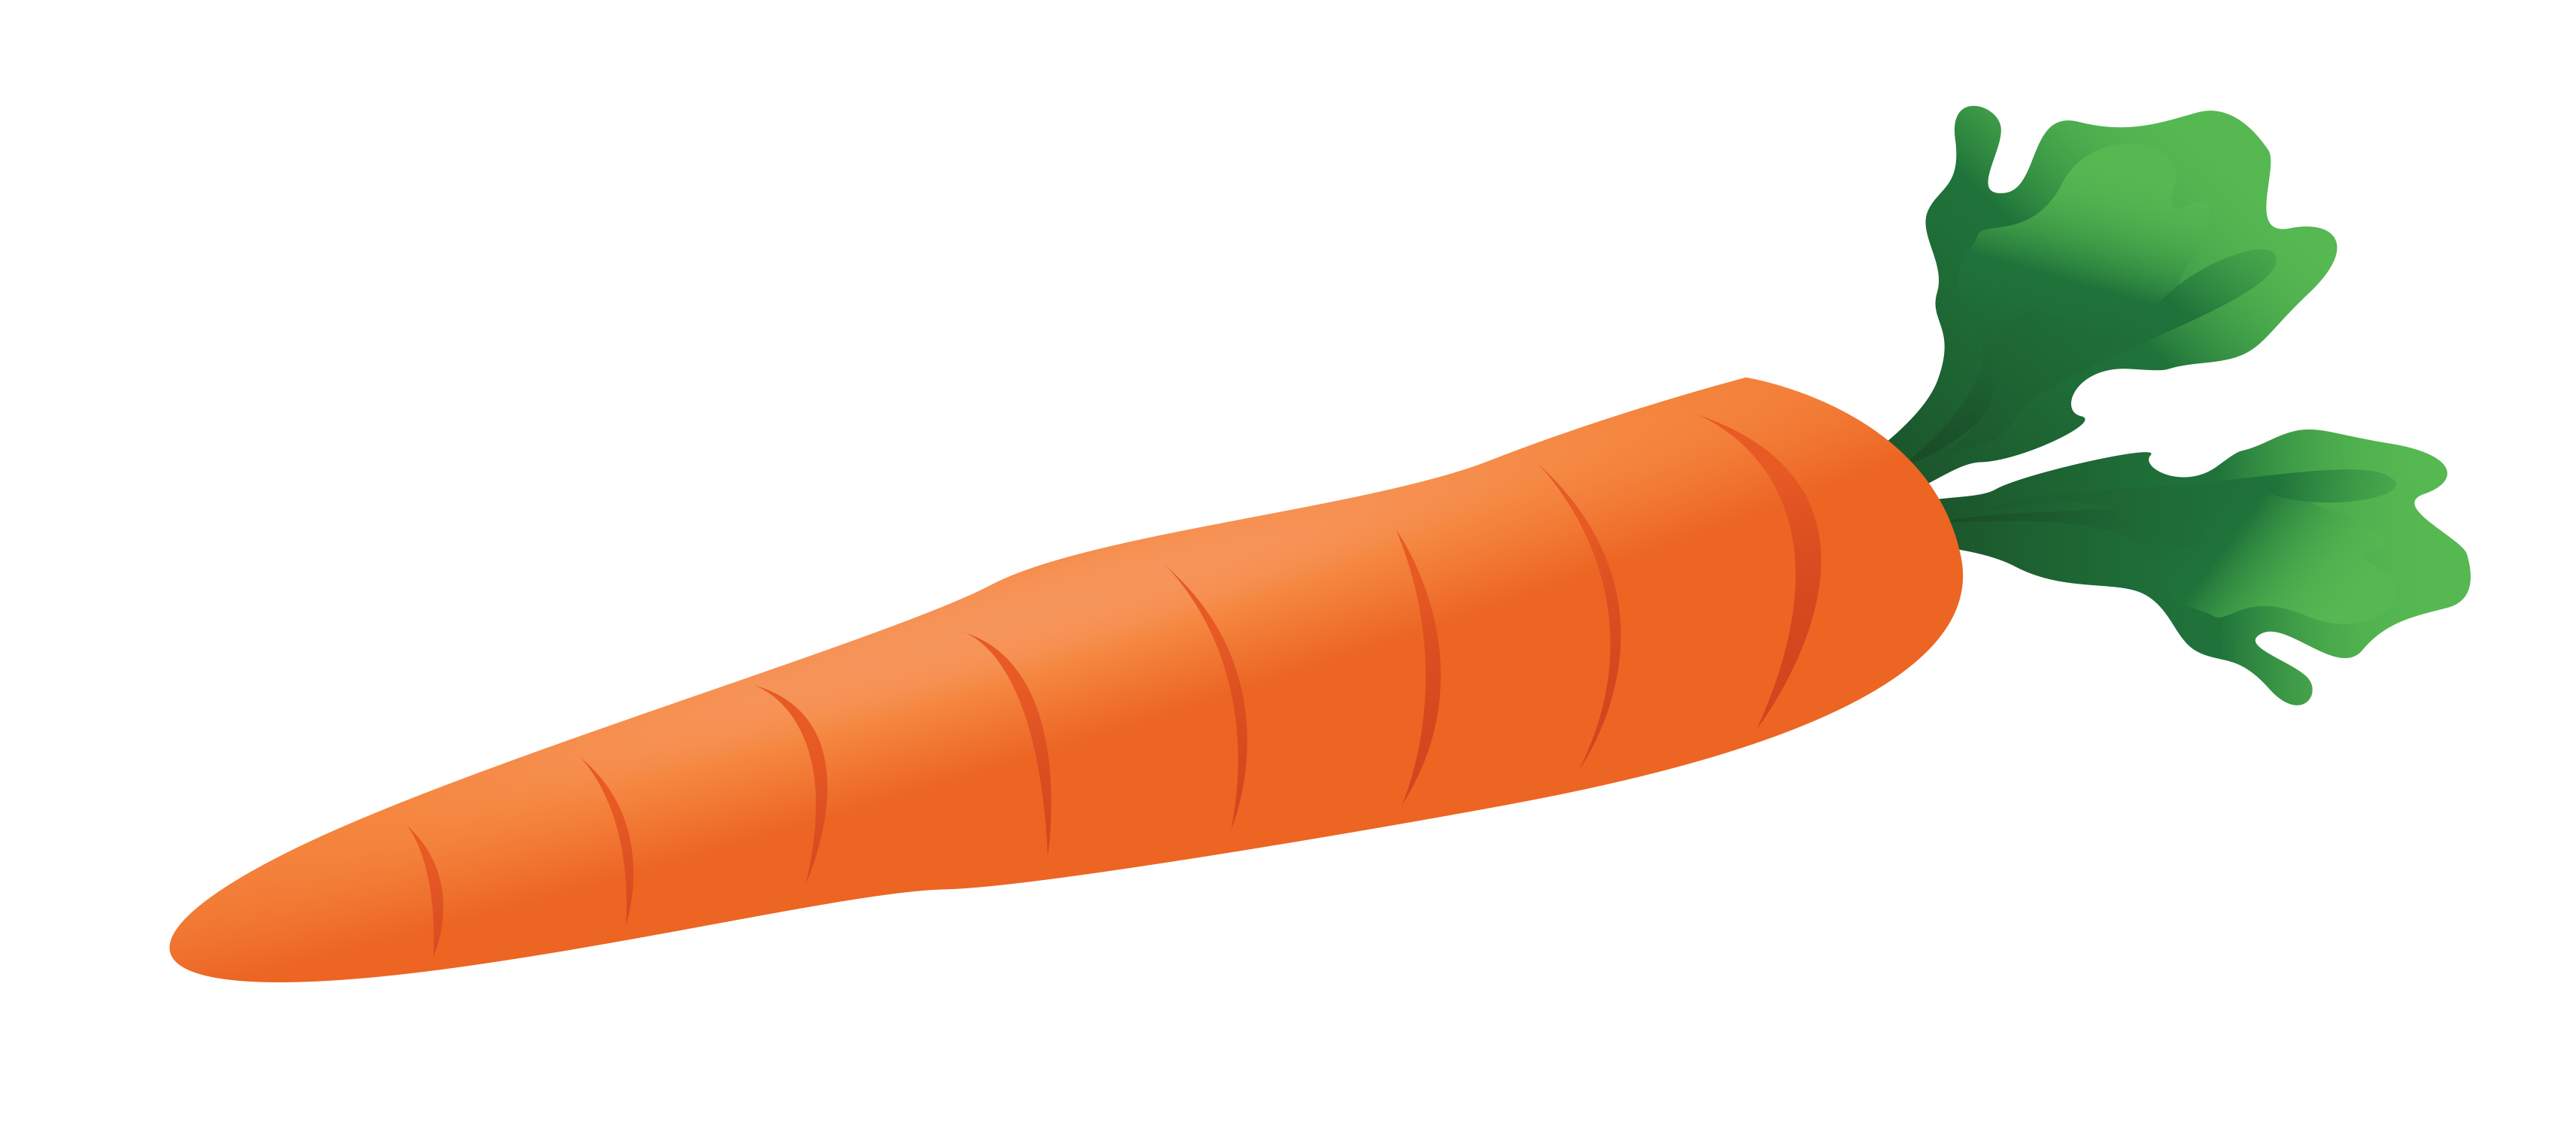 Carrot Clip Art Free Images.